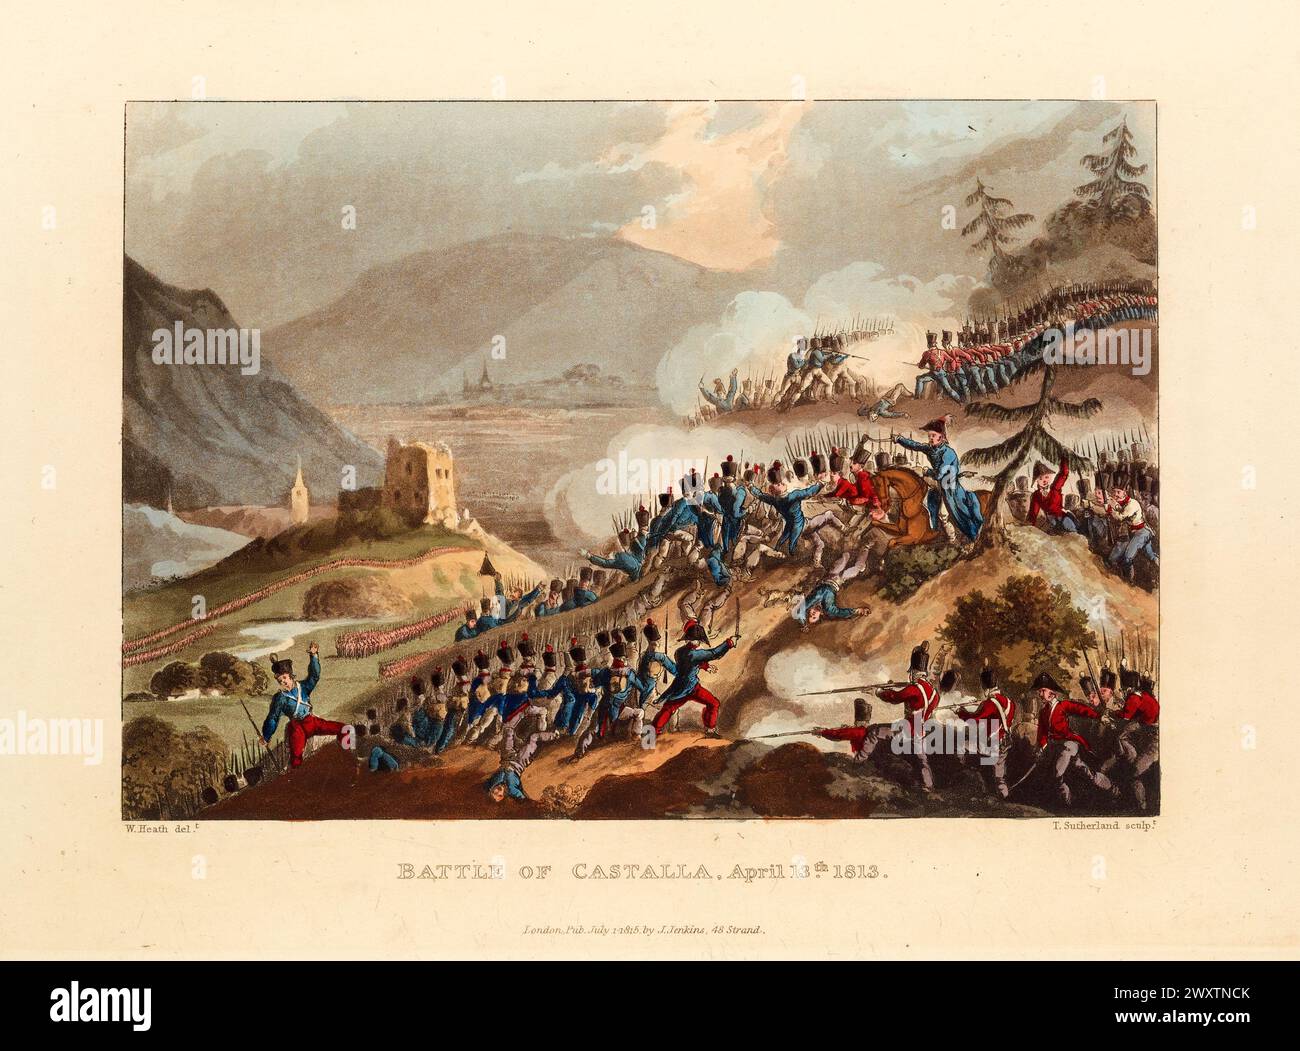 Battle of Castalla, April 12, 1813. Vintage Coloured Aquatint, published by James Jenkins, 1815,  from  The martial achievements of Great Britain and her allies : from 1799 to 1815. Stock Photo